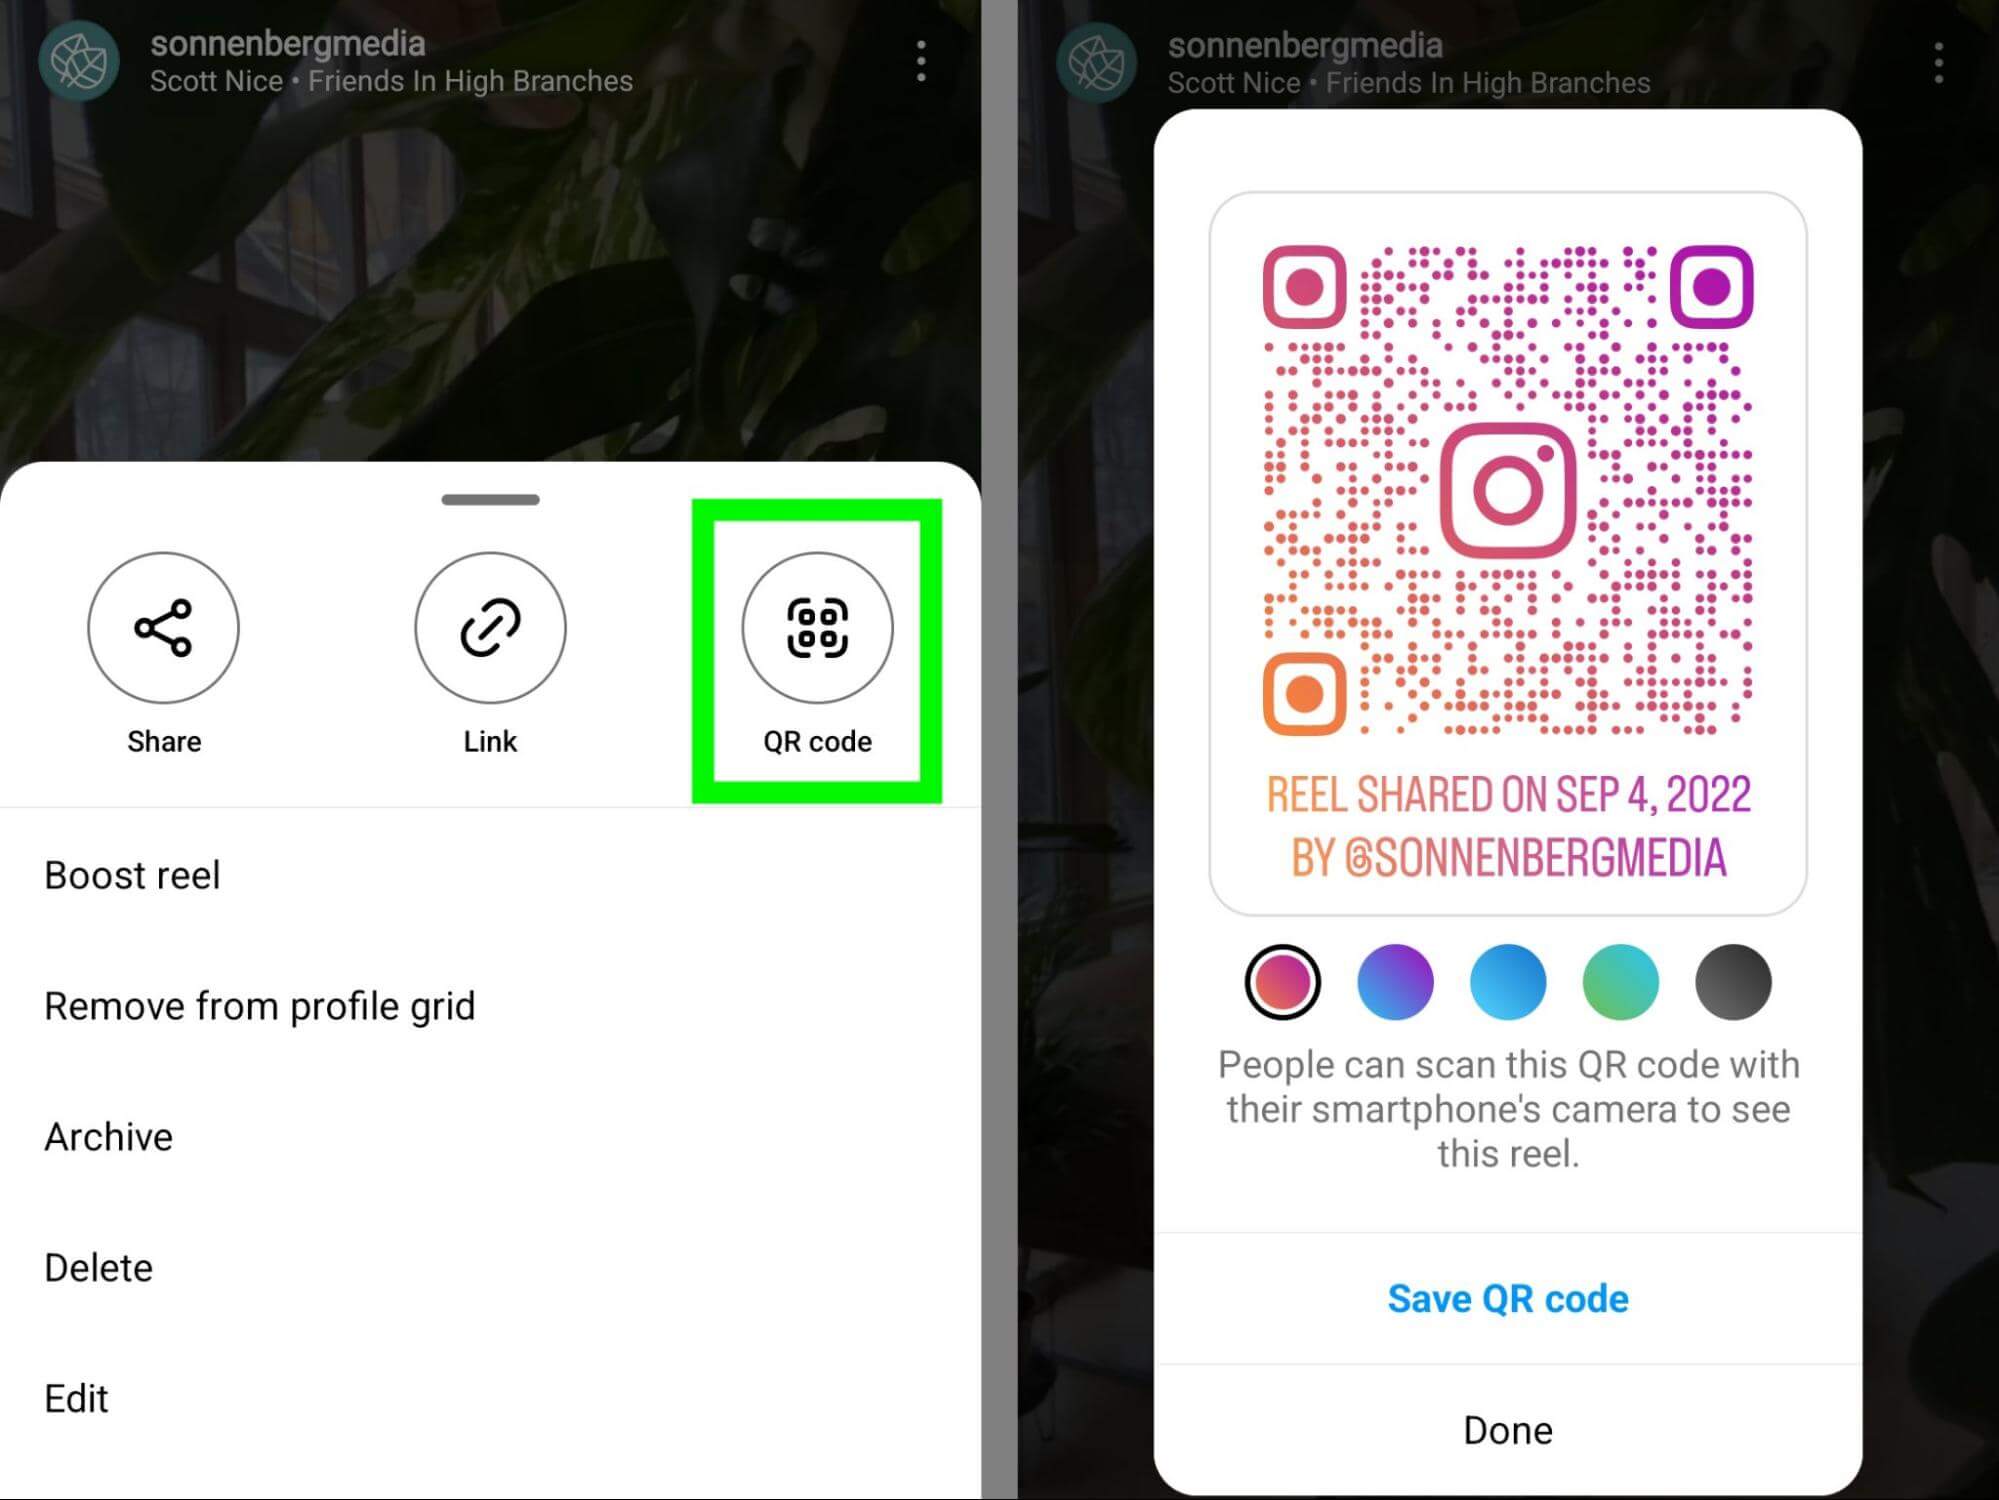 how-to-create-an-instagram-qr-code-to-share-reels-sonnenbergmedia-example-3